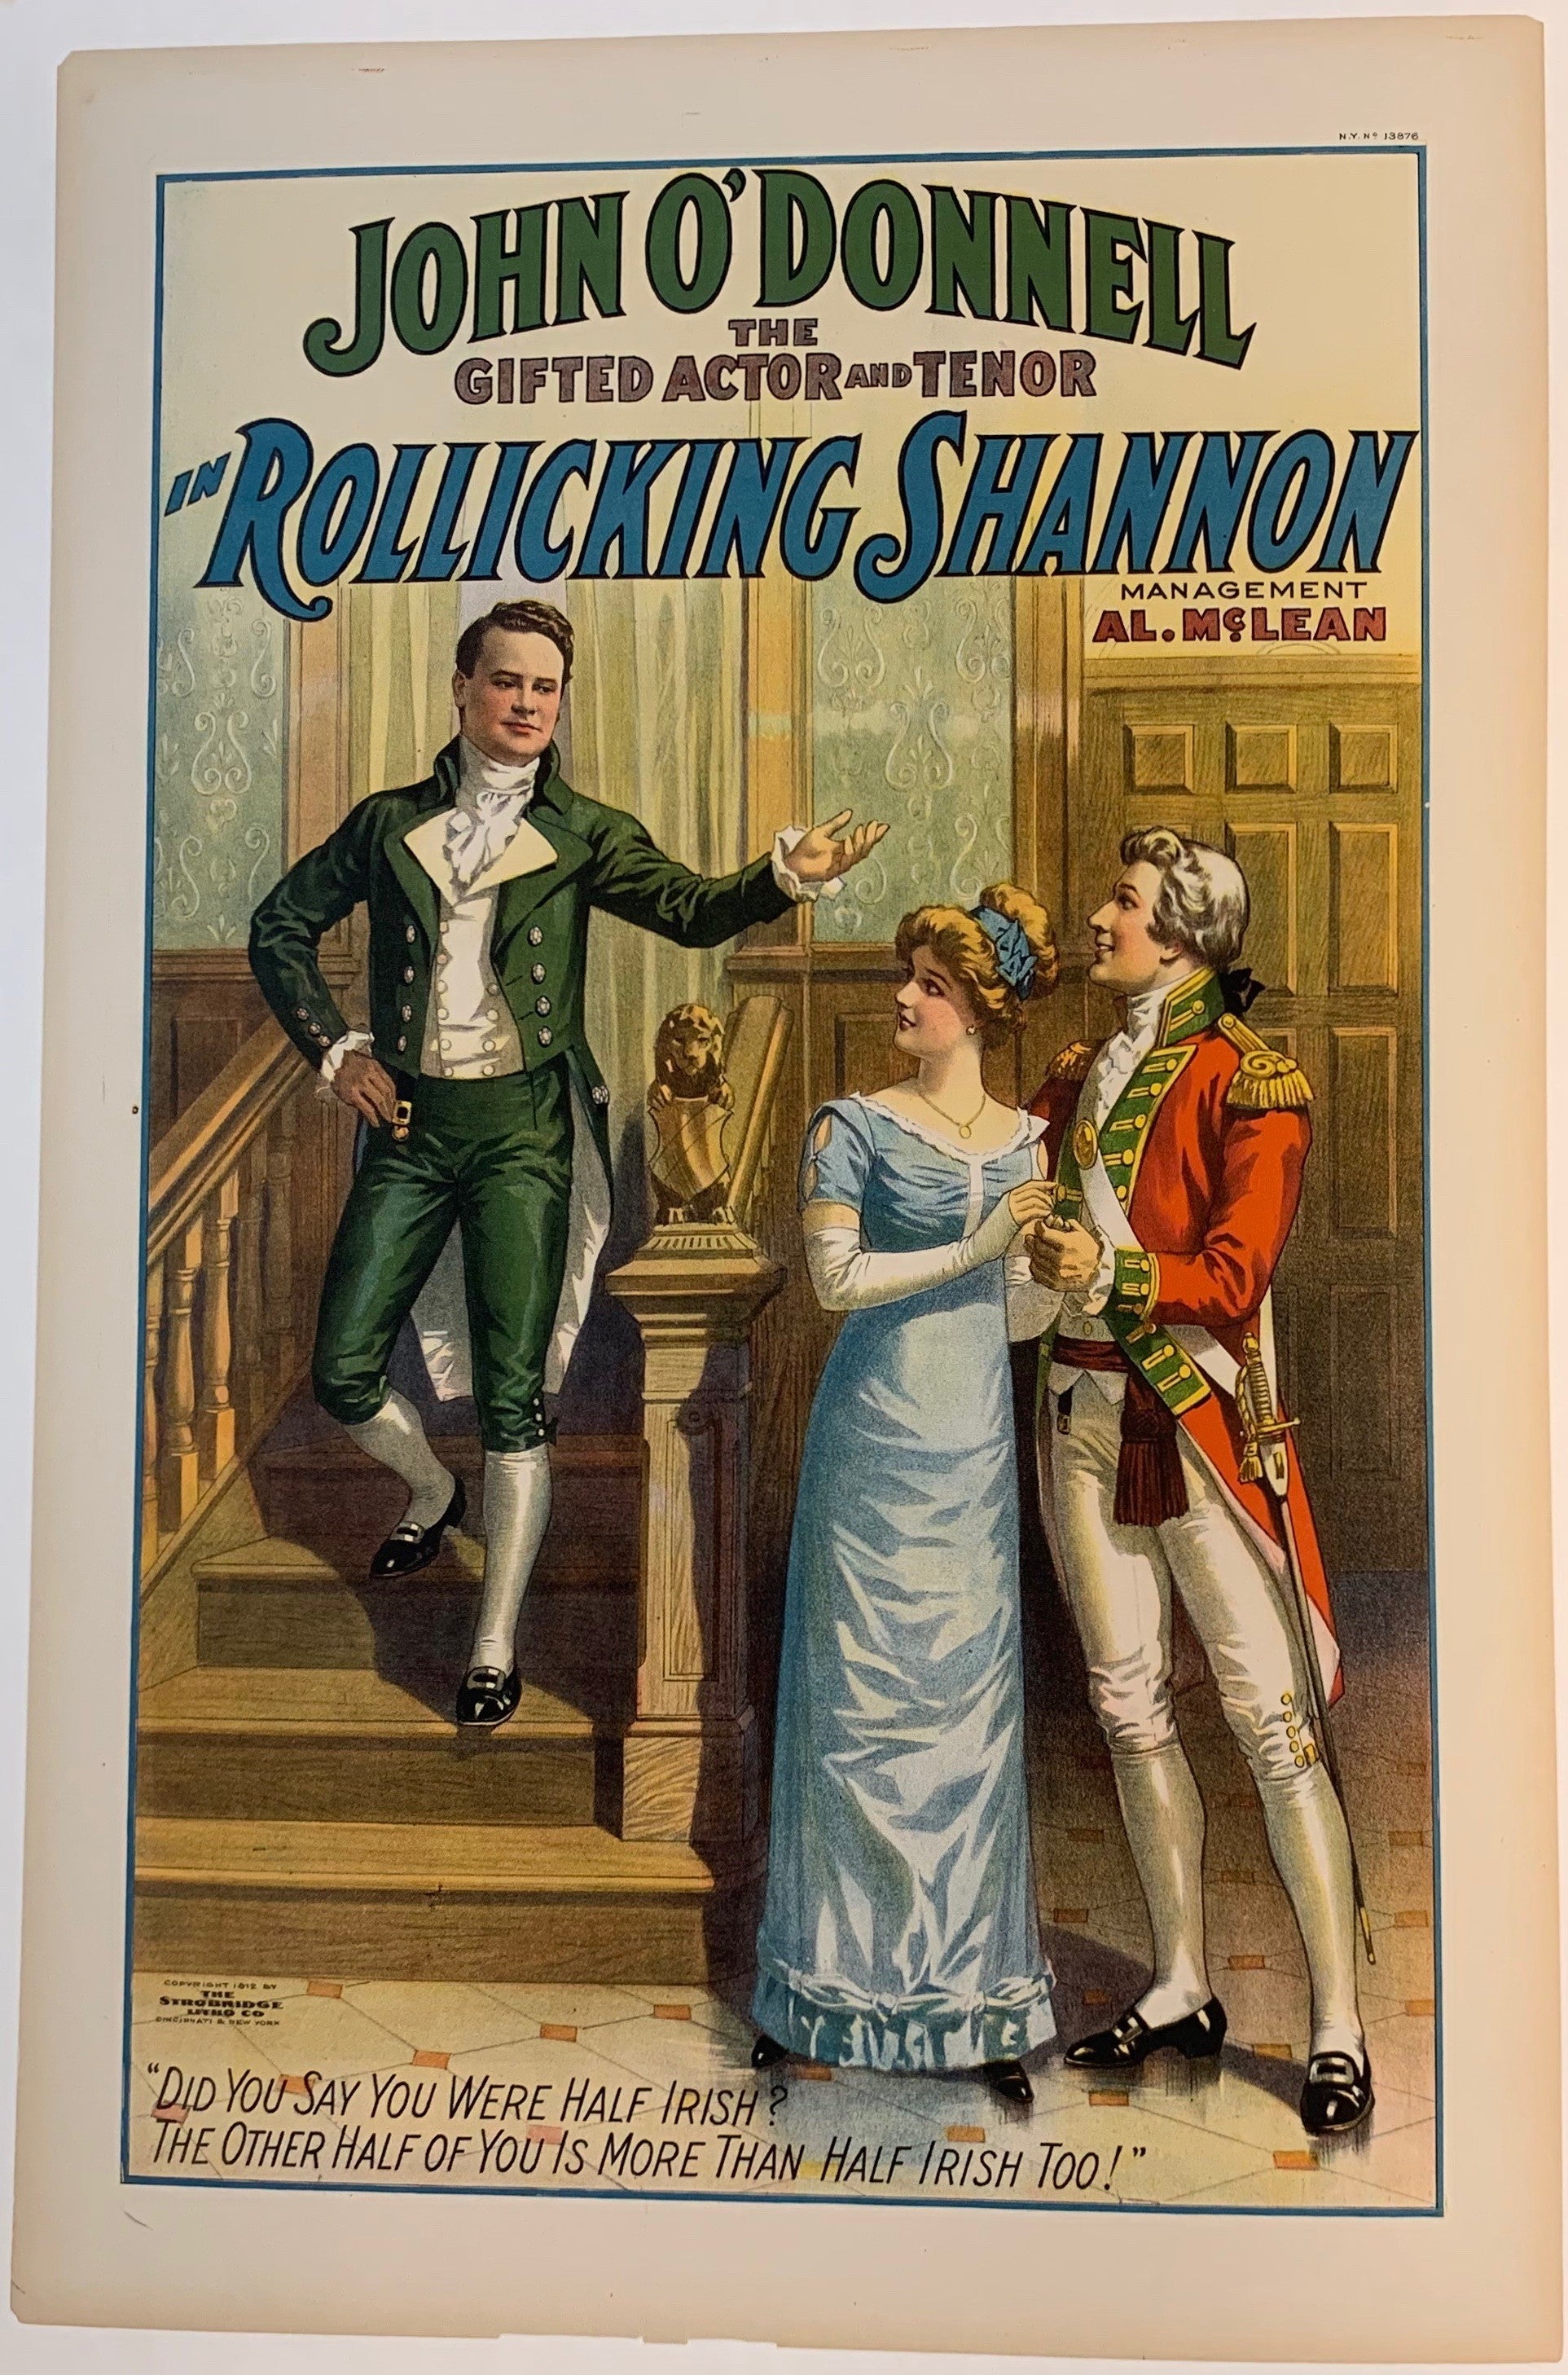 John O' Donnel in "Rollicking Shannon"